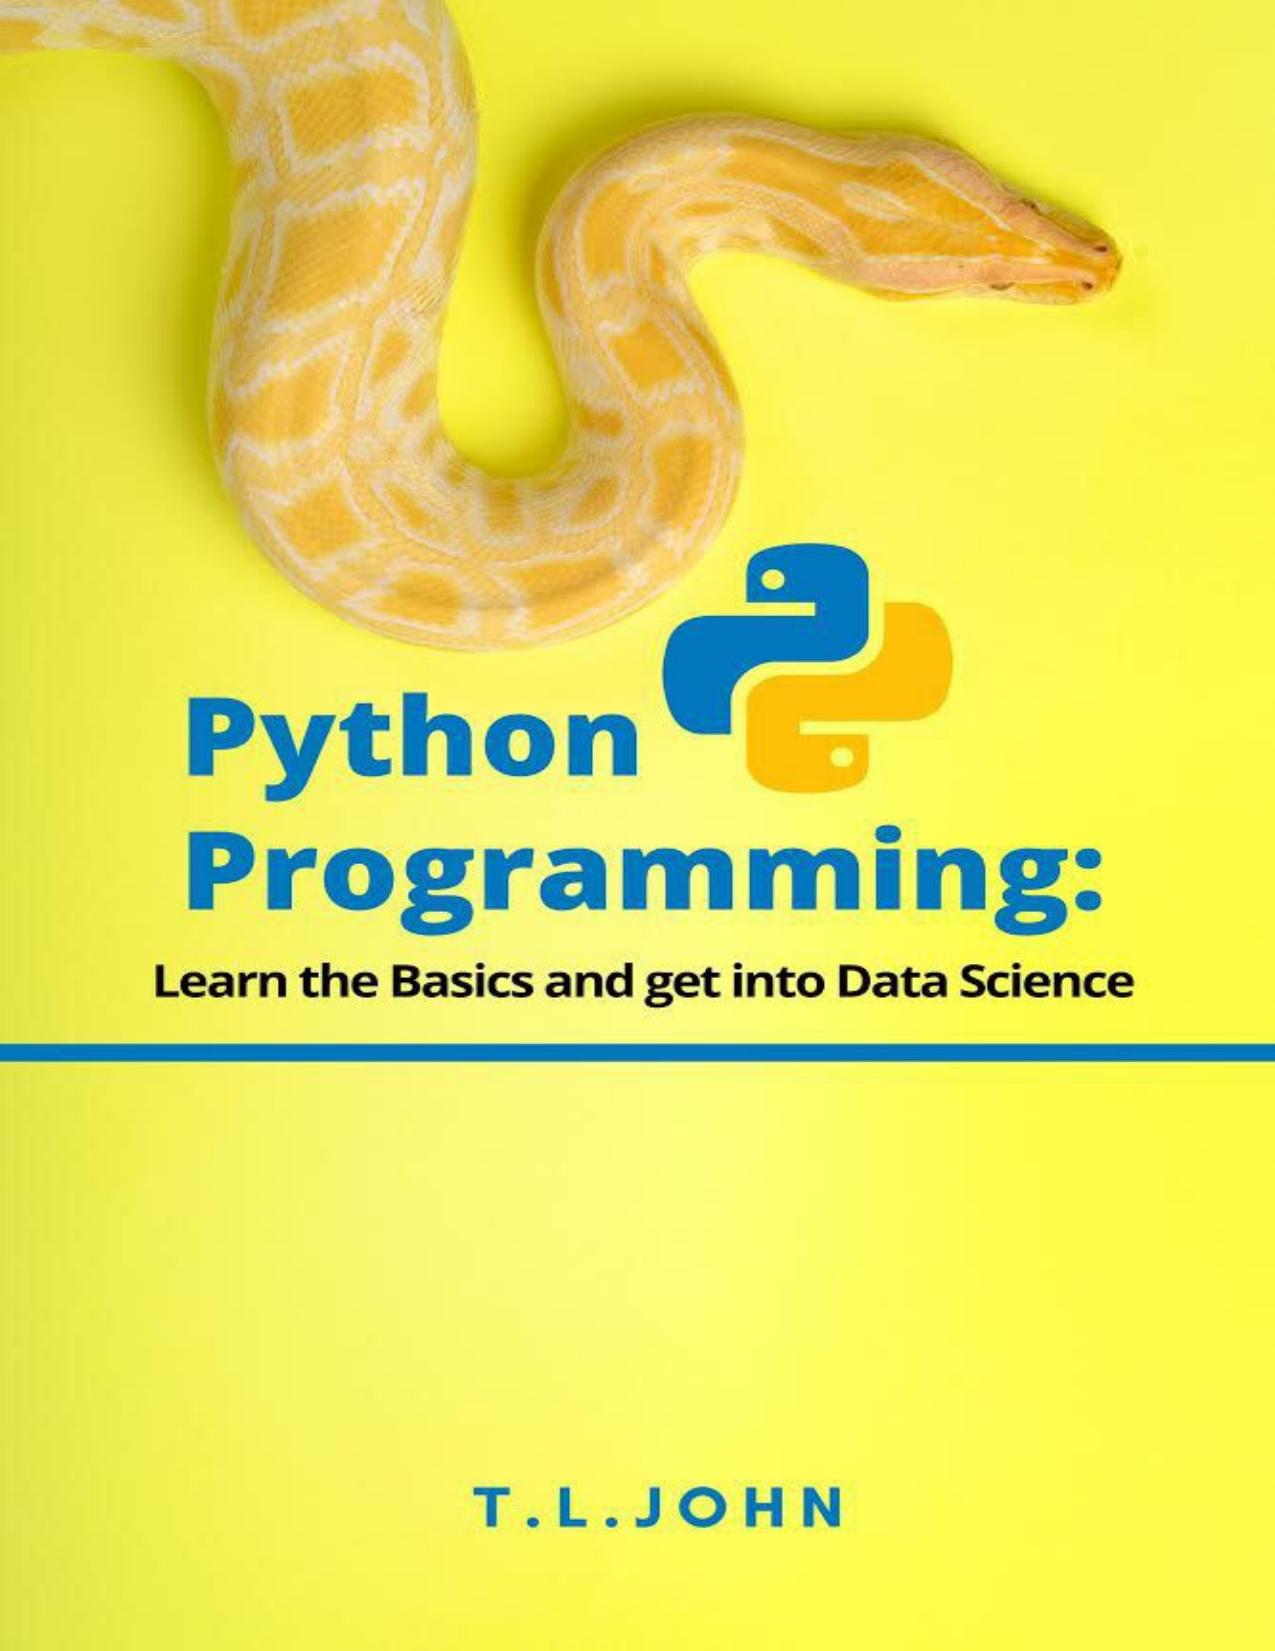 Python Programming: Learn the Basics and get into Data Science